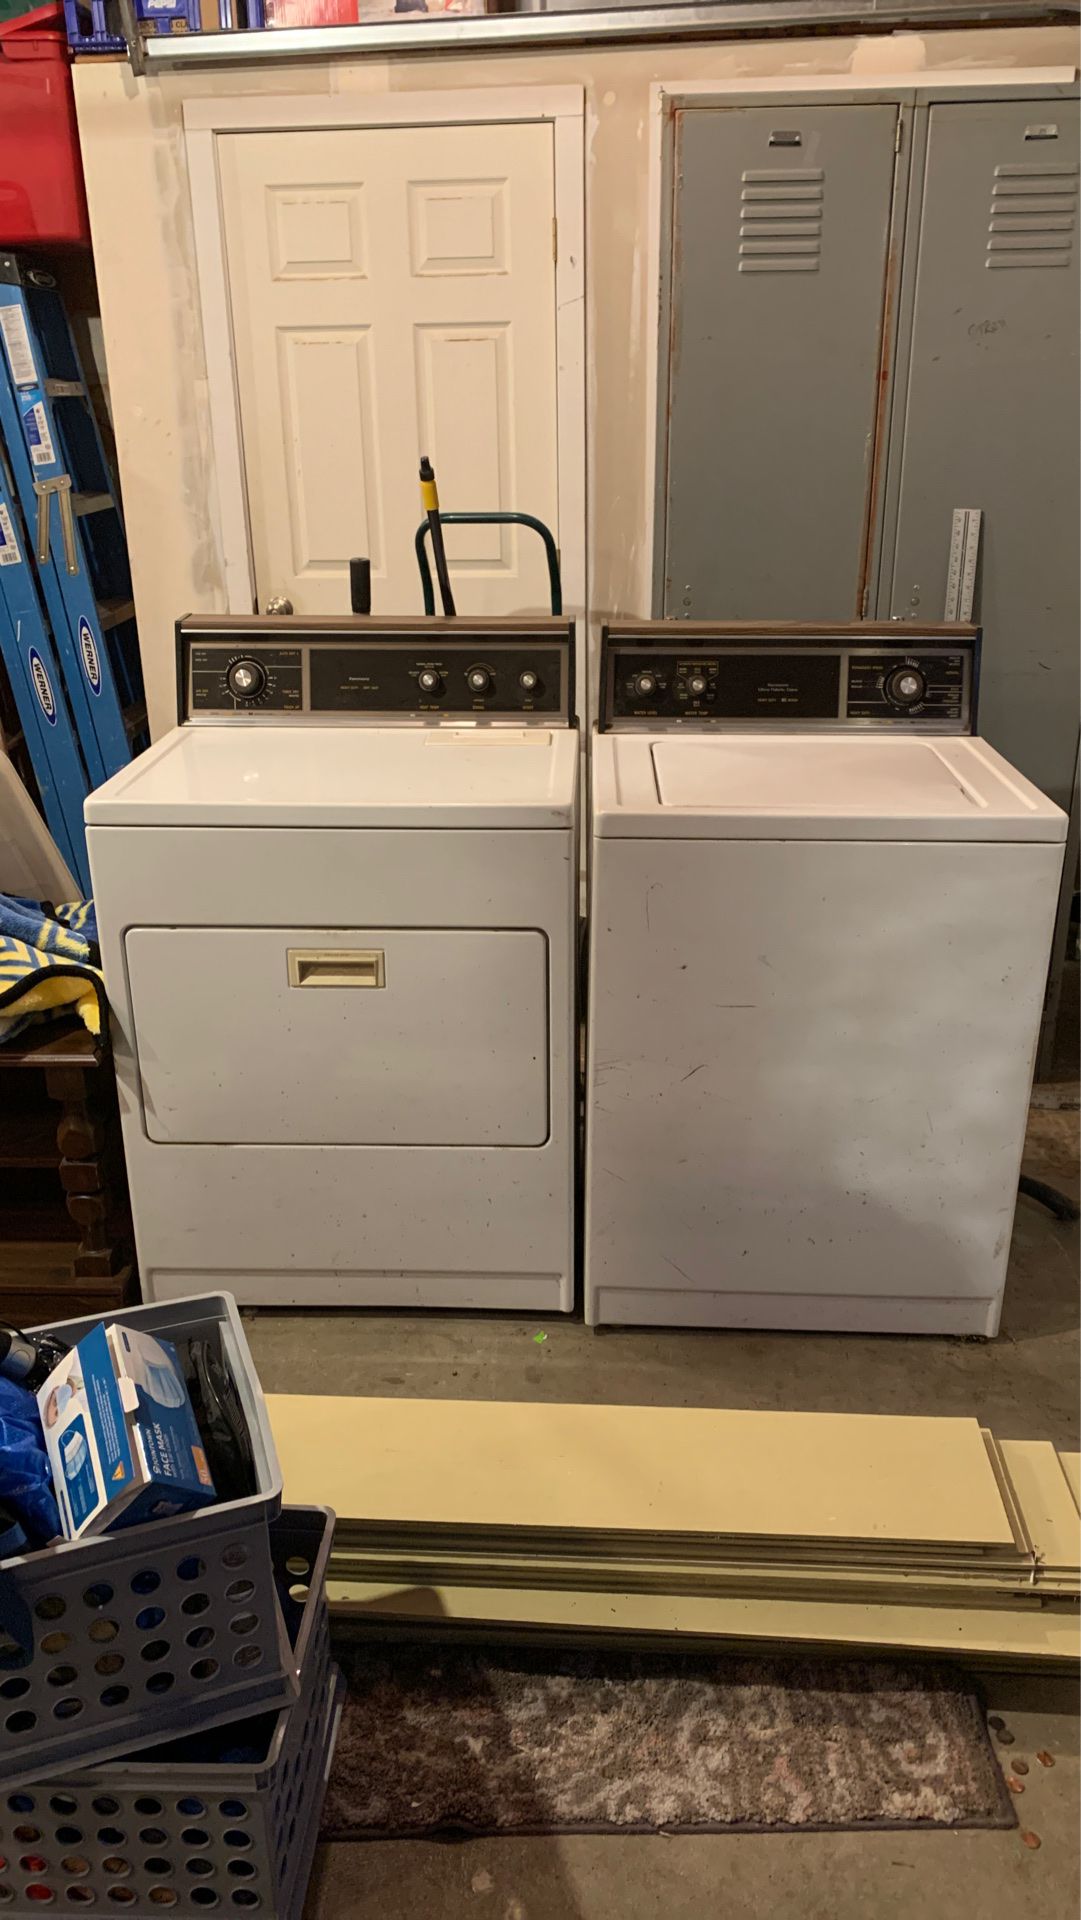 Kenmore DRYER (washer sold already)